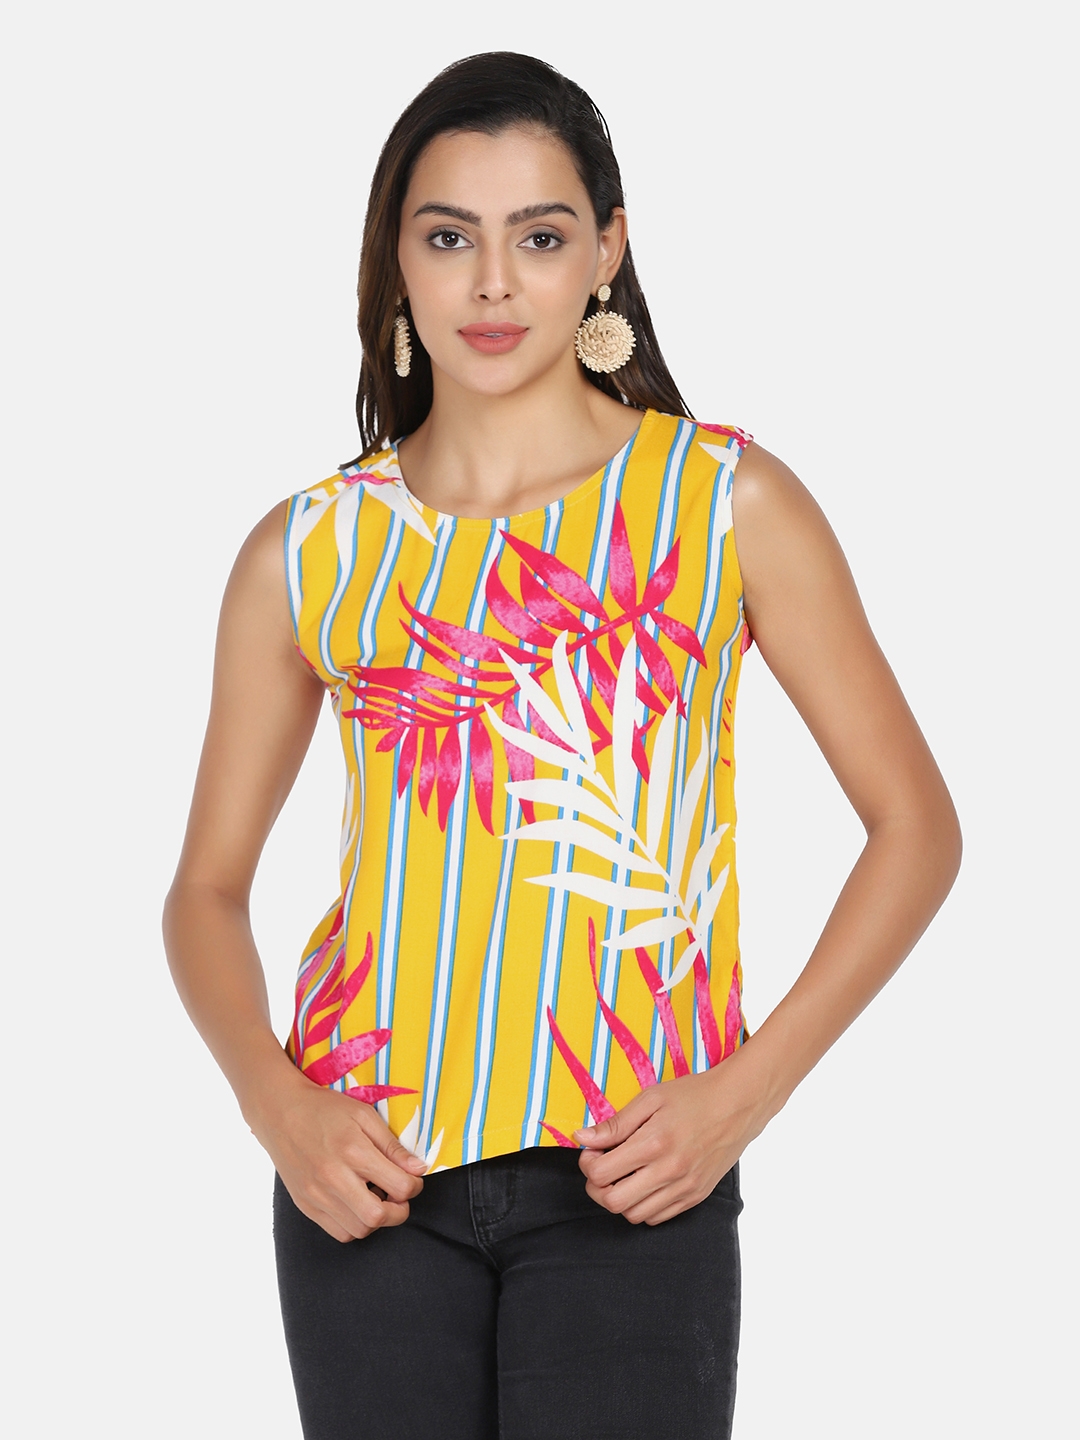 Inands | Rayon Sleeveless Yellow Leaf Printed Top undefined